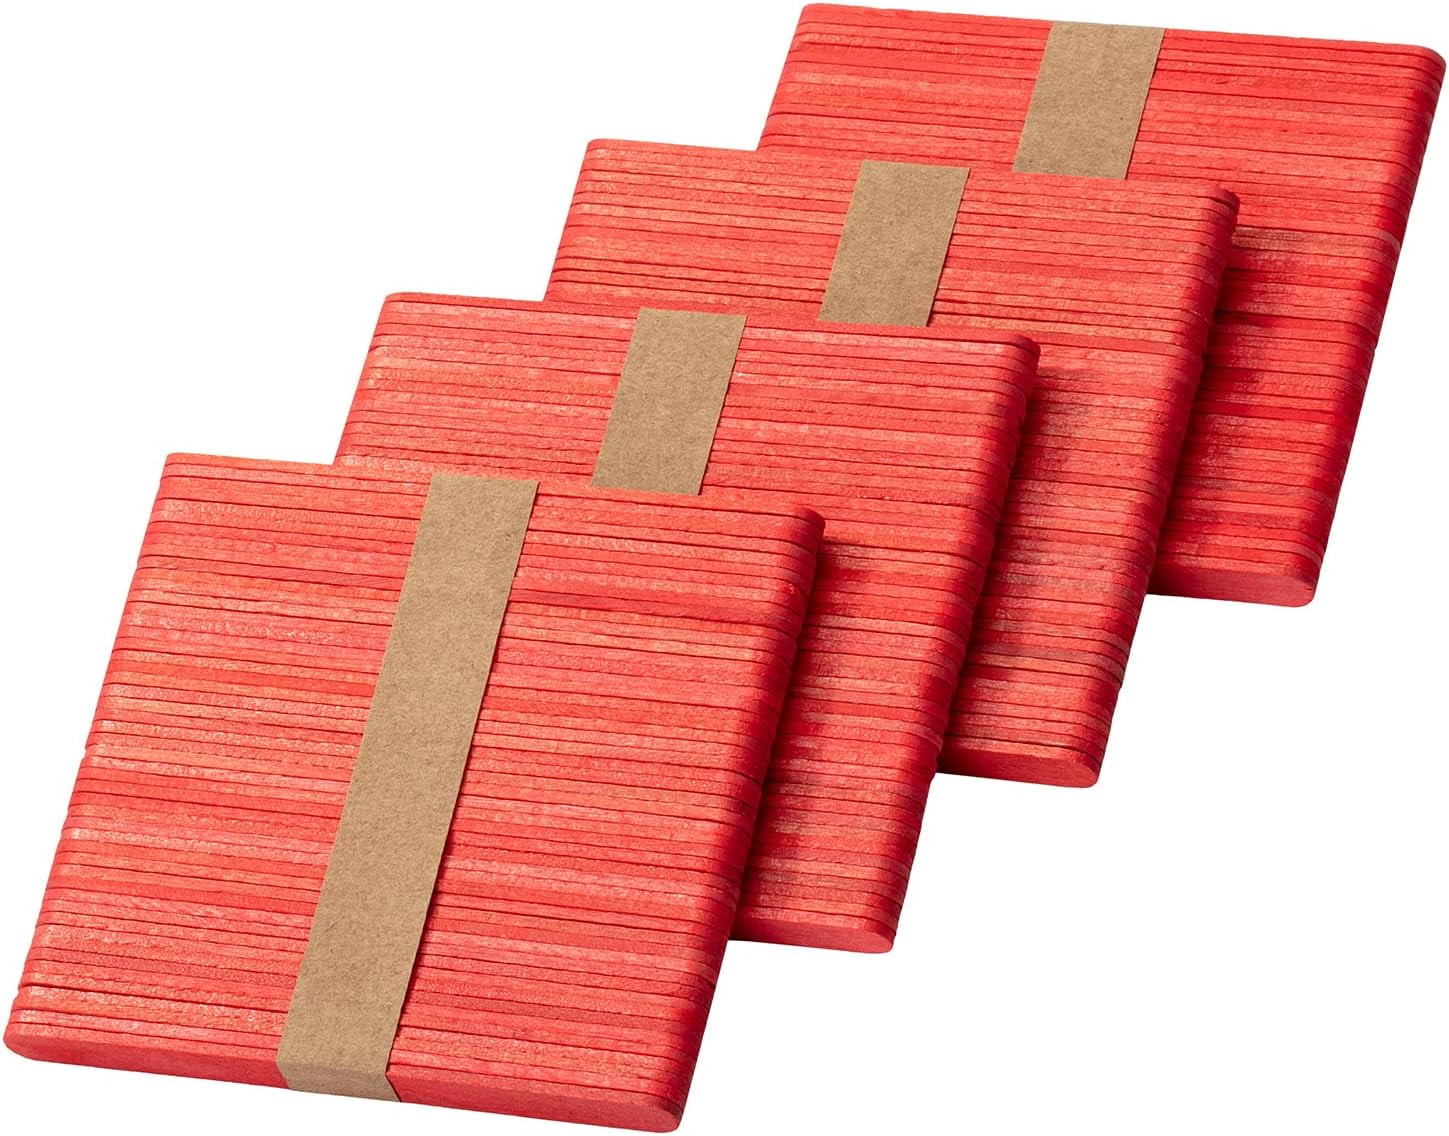 Craft Sticks, 200 Pack, 4.5 inch, Red Popsicle Stick, Popsicle Sticks for Crafts, Wood Sticks, Sticks for Crafting, Wax Sticks, Popsicle Stick Crafts